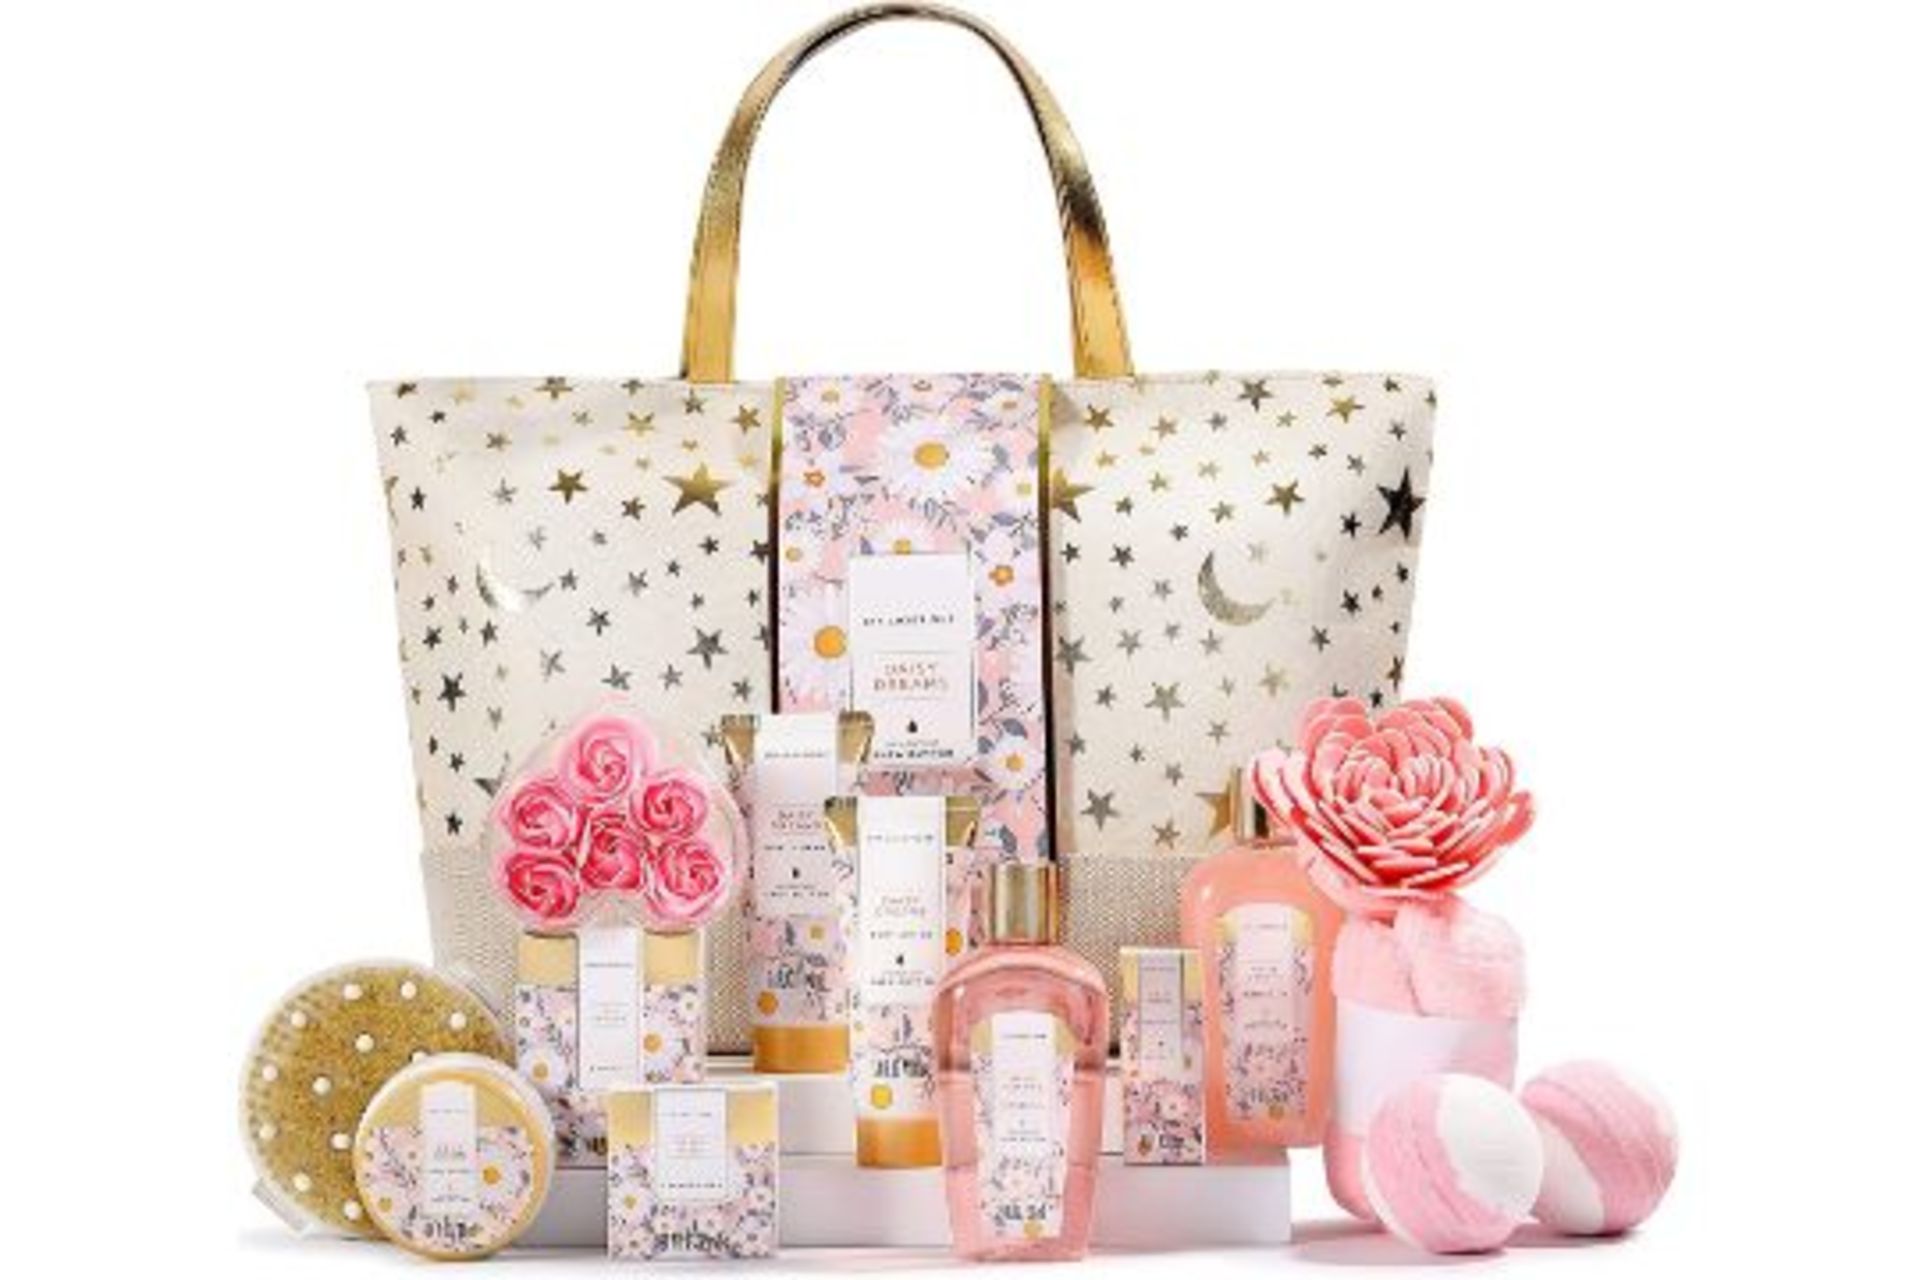 2 X NEW BOXED SPA LUXETIQUE DAISY DREAMS 15 PIECE GIFT SET WITH BAG. RRP £49.99 EACH. ENRICHED